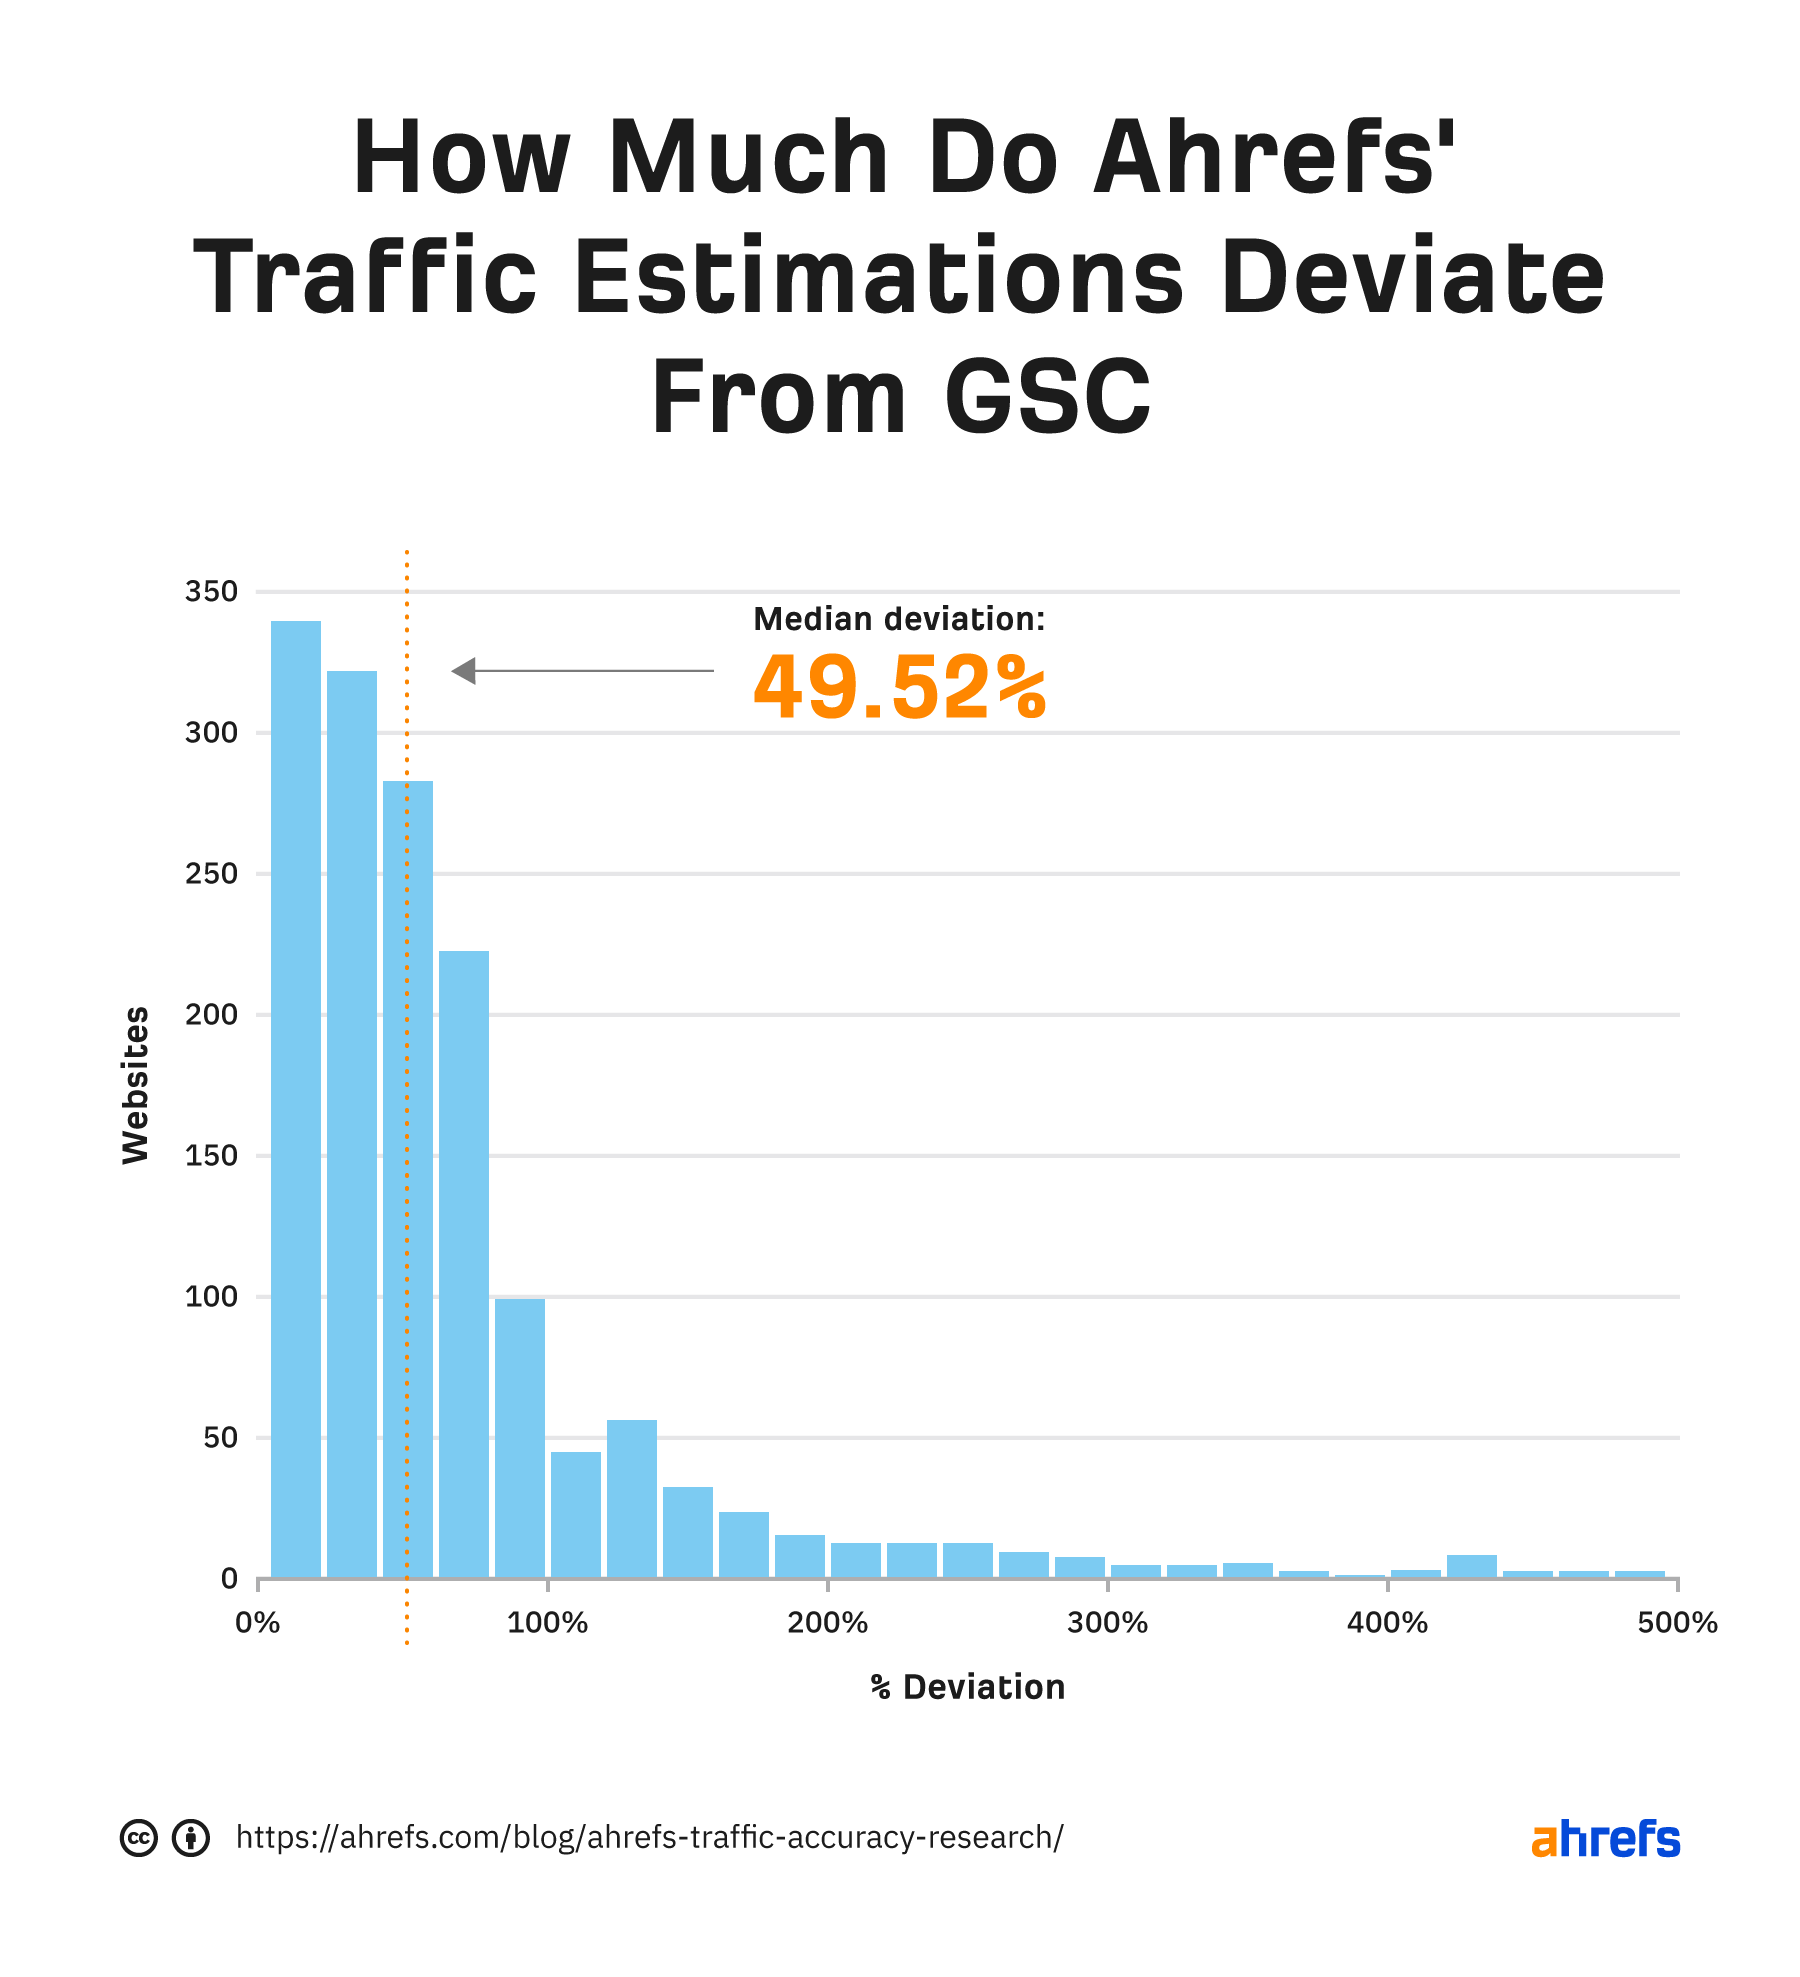 The median deviation between Ahrefs' traffic estimations and GSC is 49.52%.